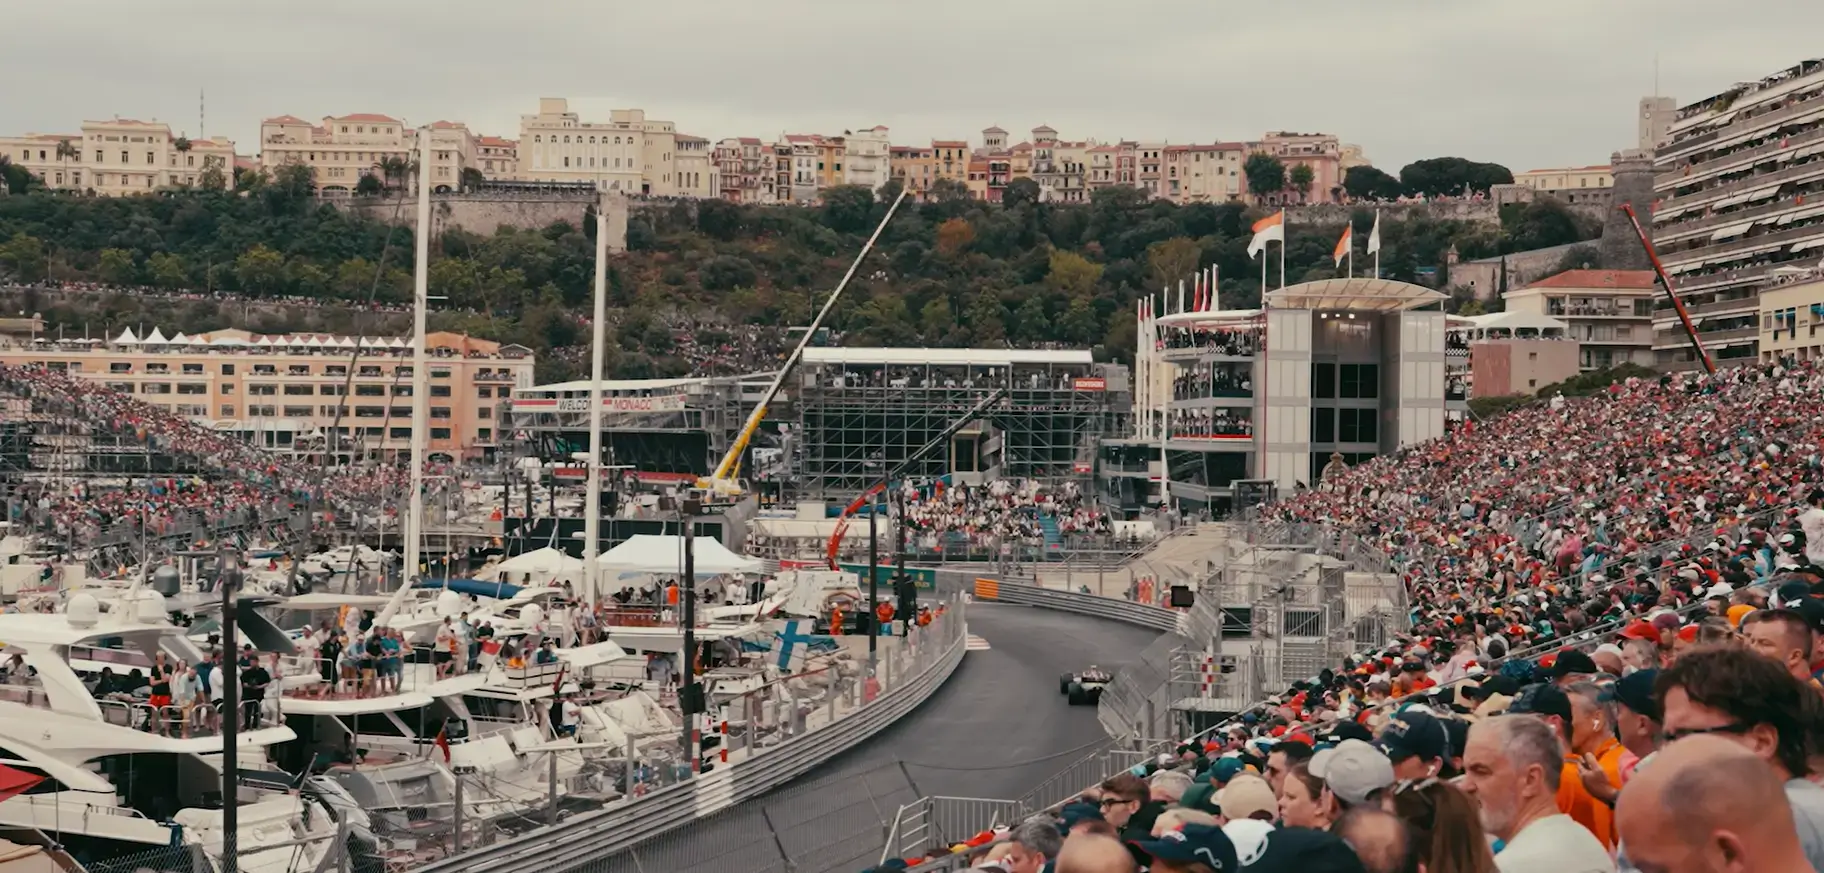 Monaco grand prix race track in action with a packed grand stand